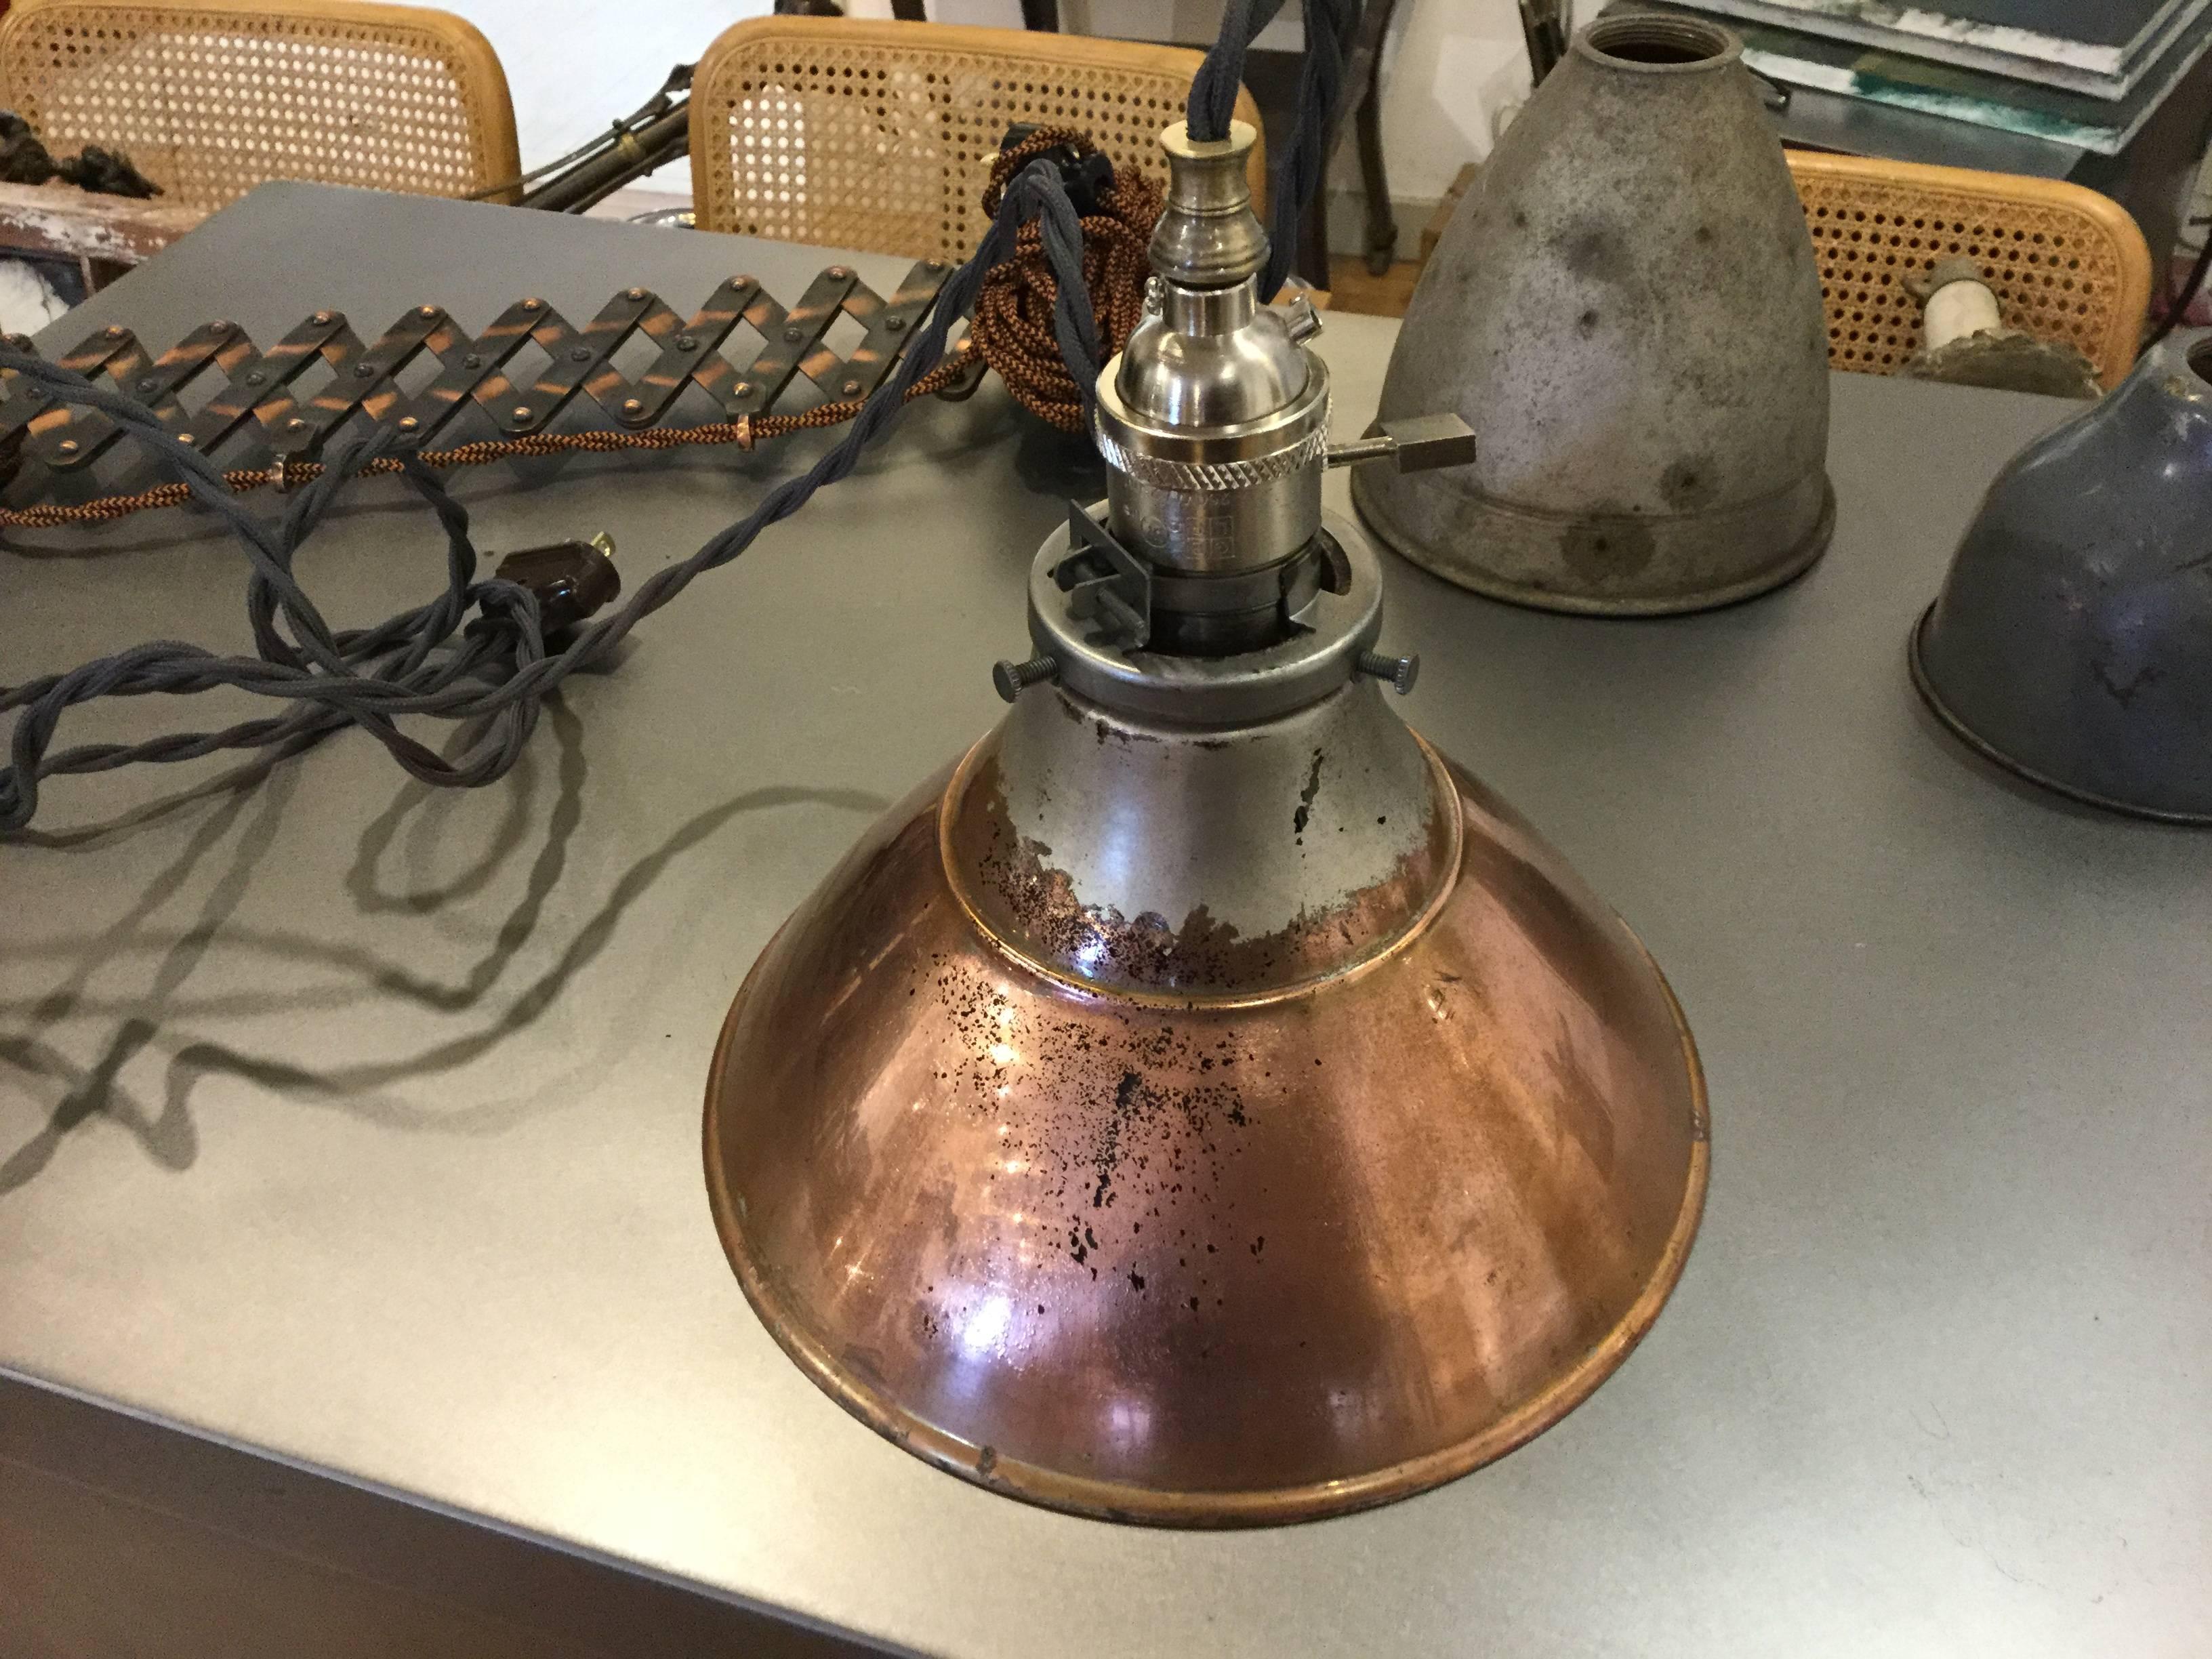 Mercury glass industrial pendant light. The copper on the shell of the shade has a beautiful patina. Inside is the Mercury glass. The light has brand new wiring plug, and socket. It’s ready to install.